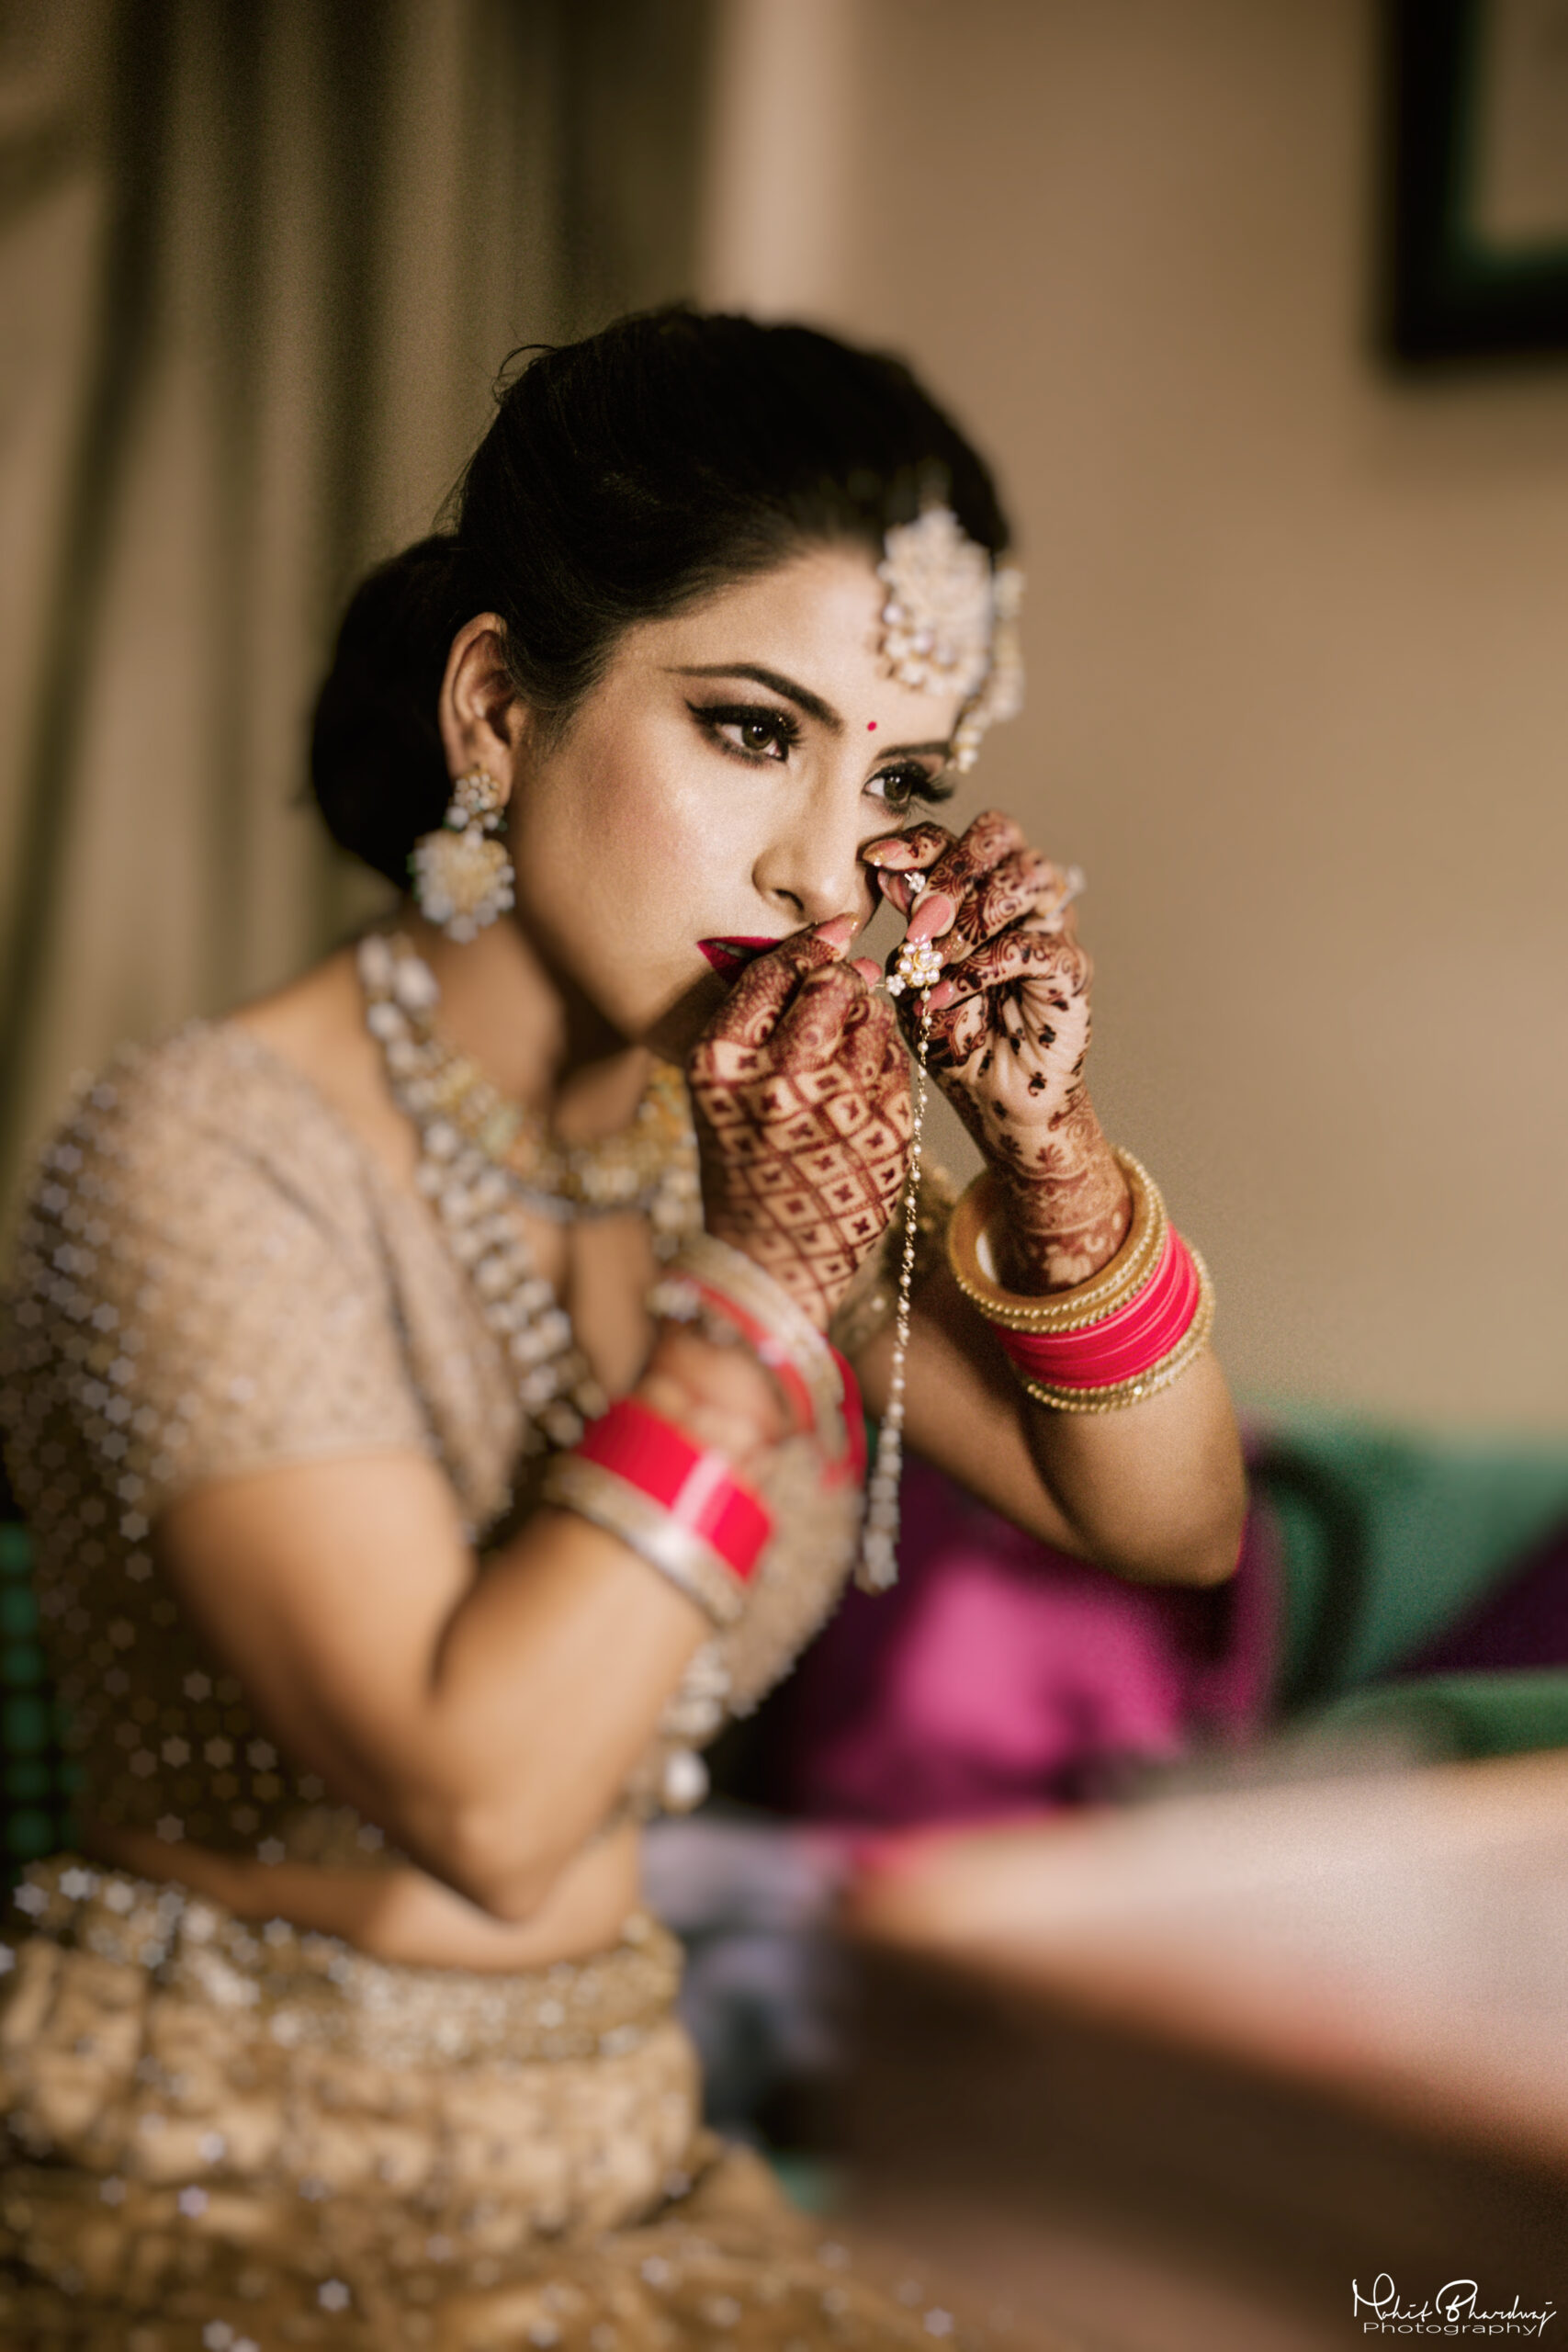 Bookmark These 40+ Fun & Candid Haldi Photoshoot Poses for Bride, Groom,  Friends & Family